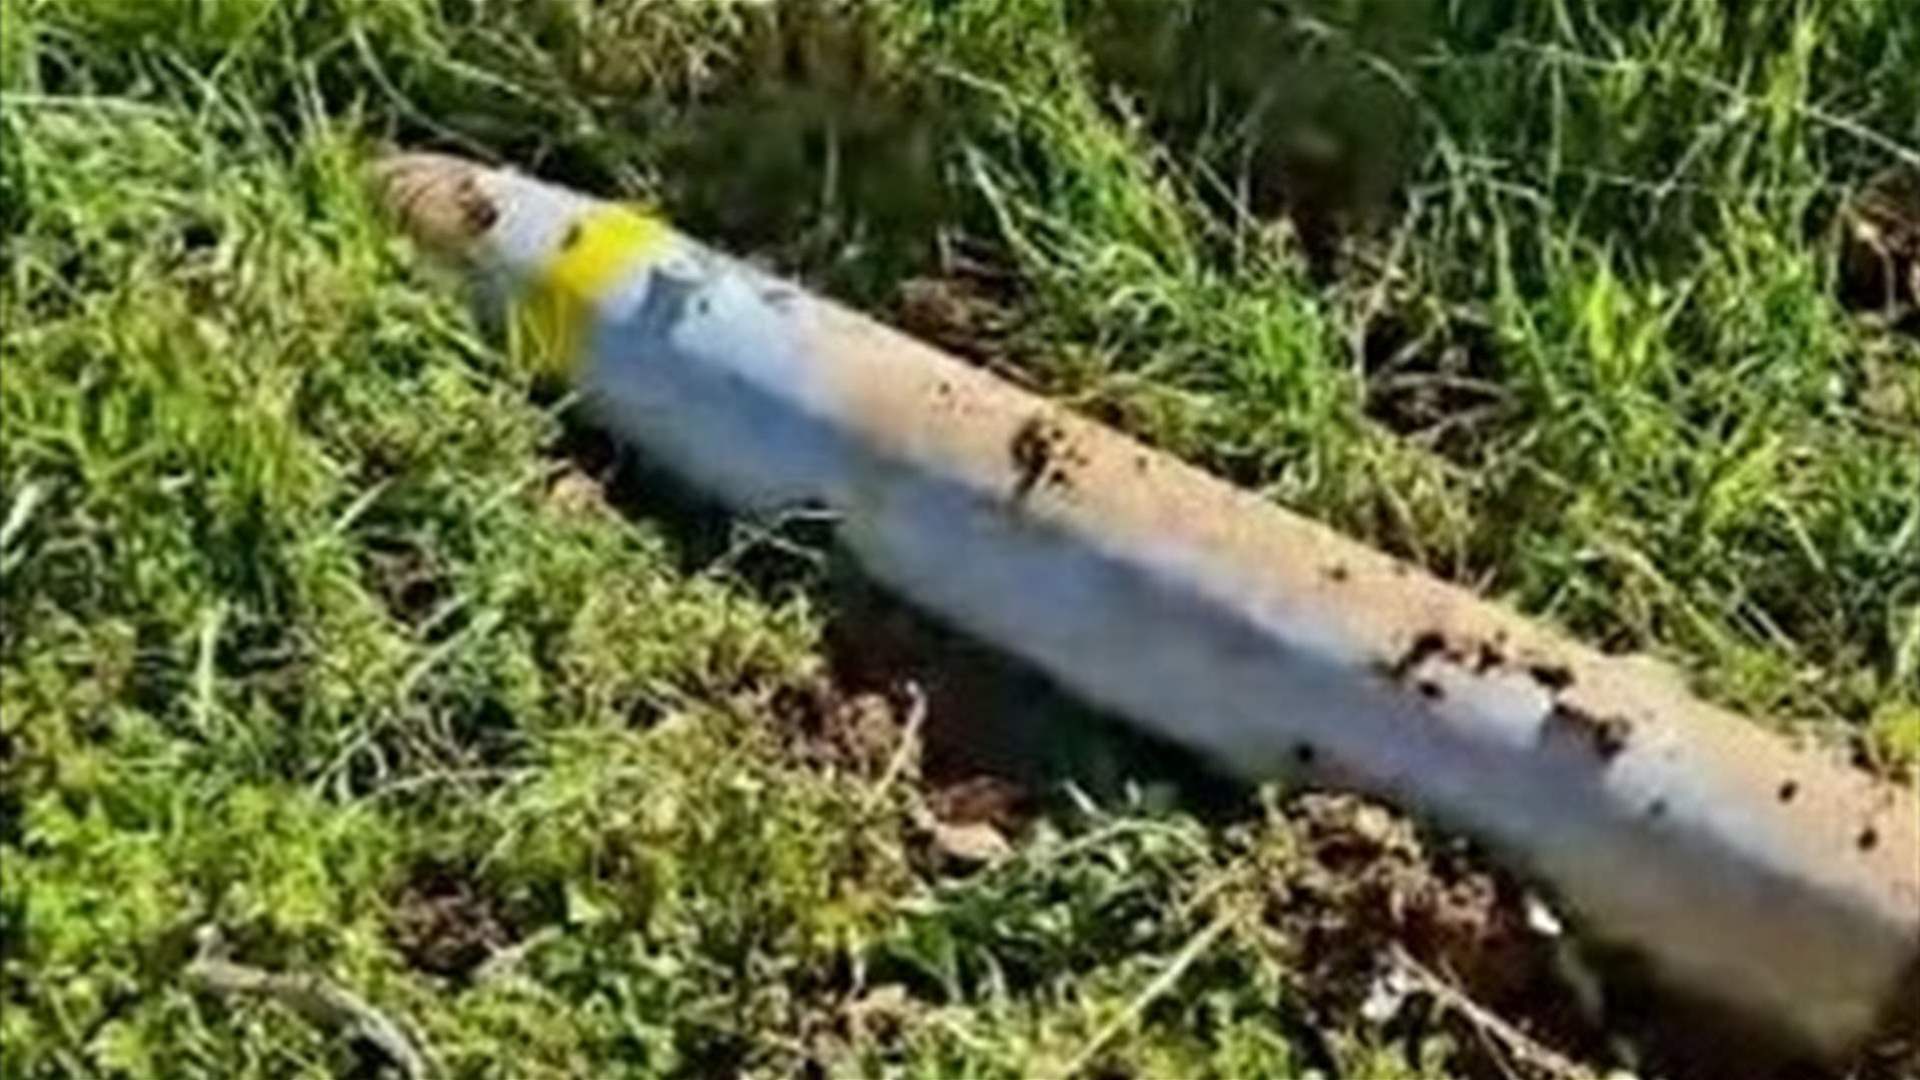 Possible Israeli airstrike fallout: Unexploded missile found in Keserwan 